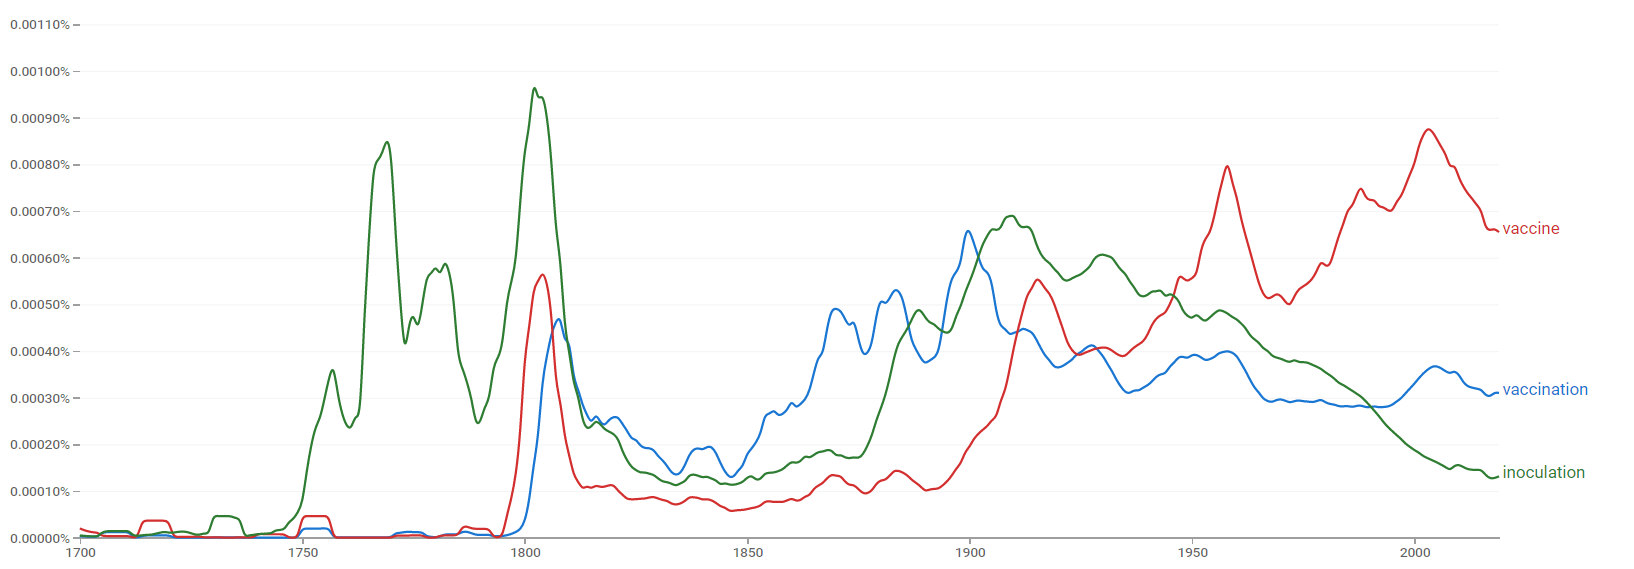 Vaccination, vaccine and inoculation ngram.png